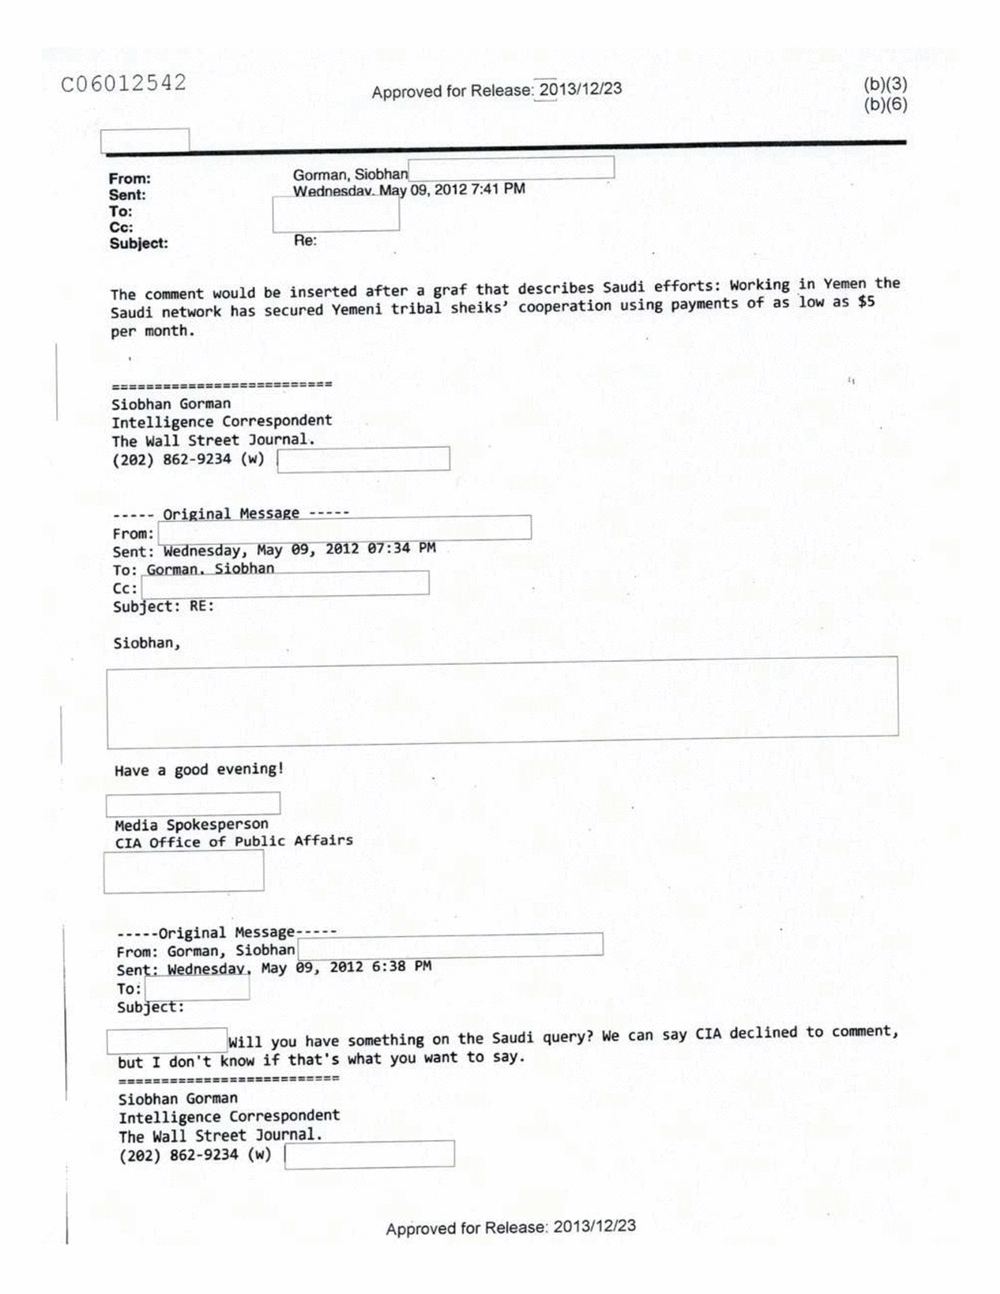 Page 75 from Email Correspondence Between Reporters and CIA Flacks